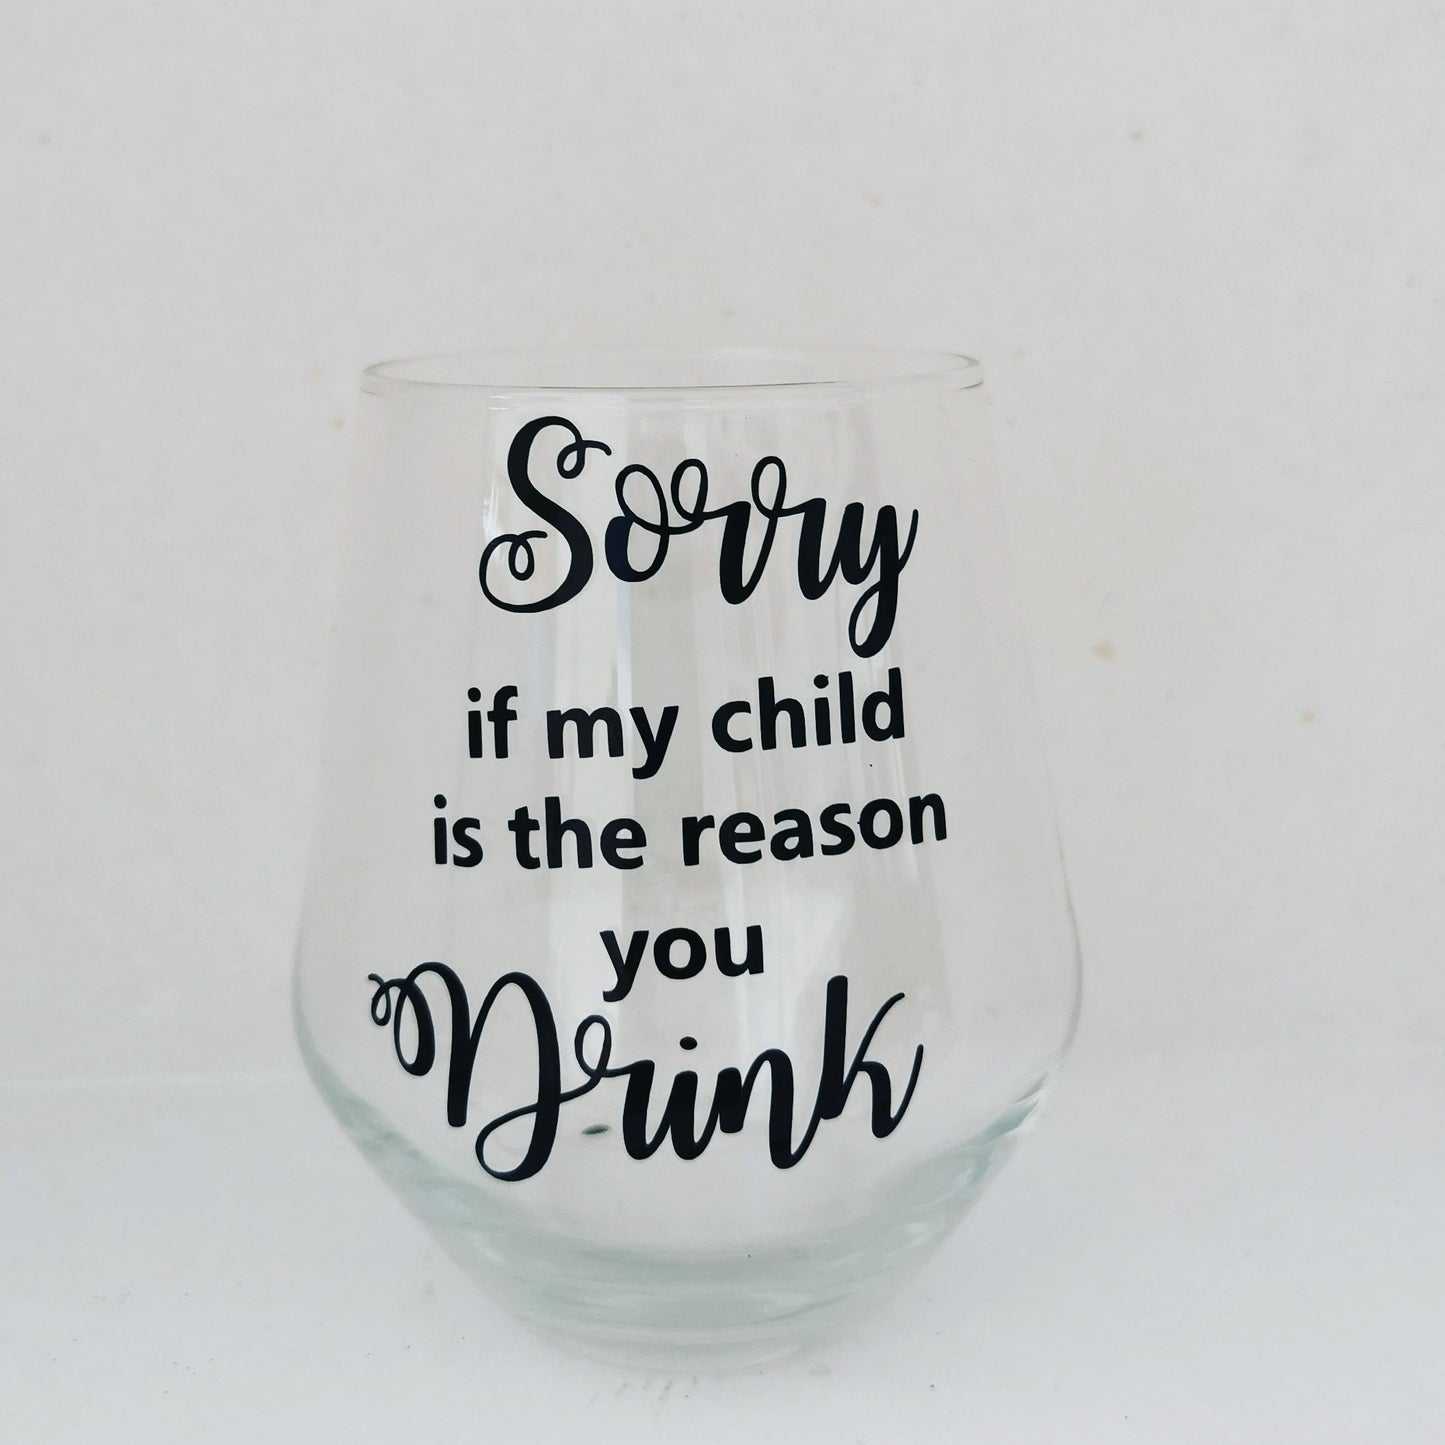 Sorry if my child is the reason you drink